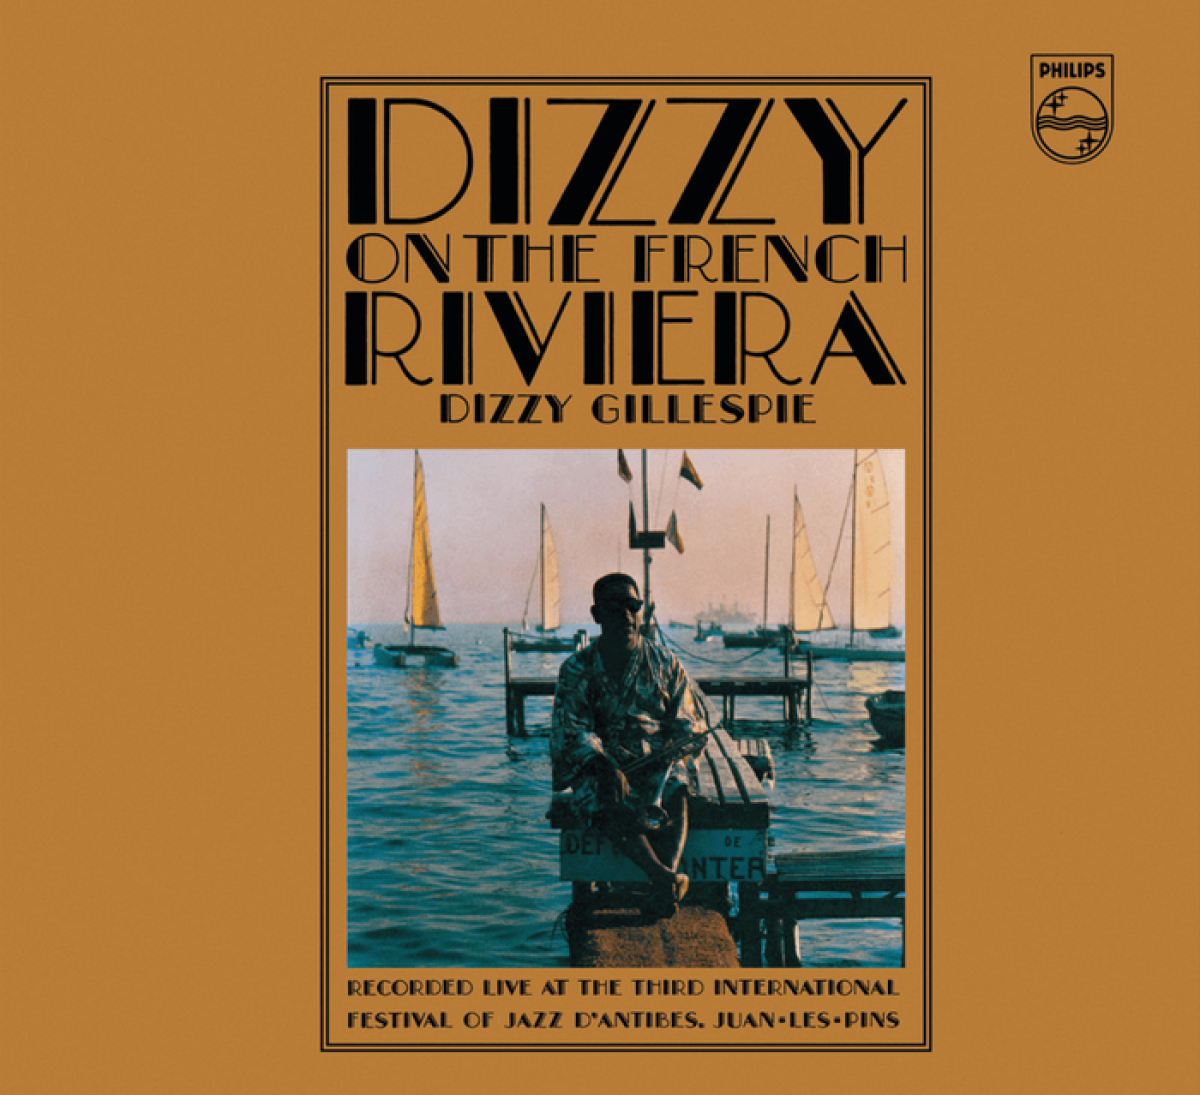 Dizzy on the french riviera